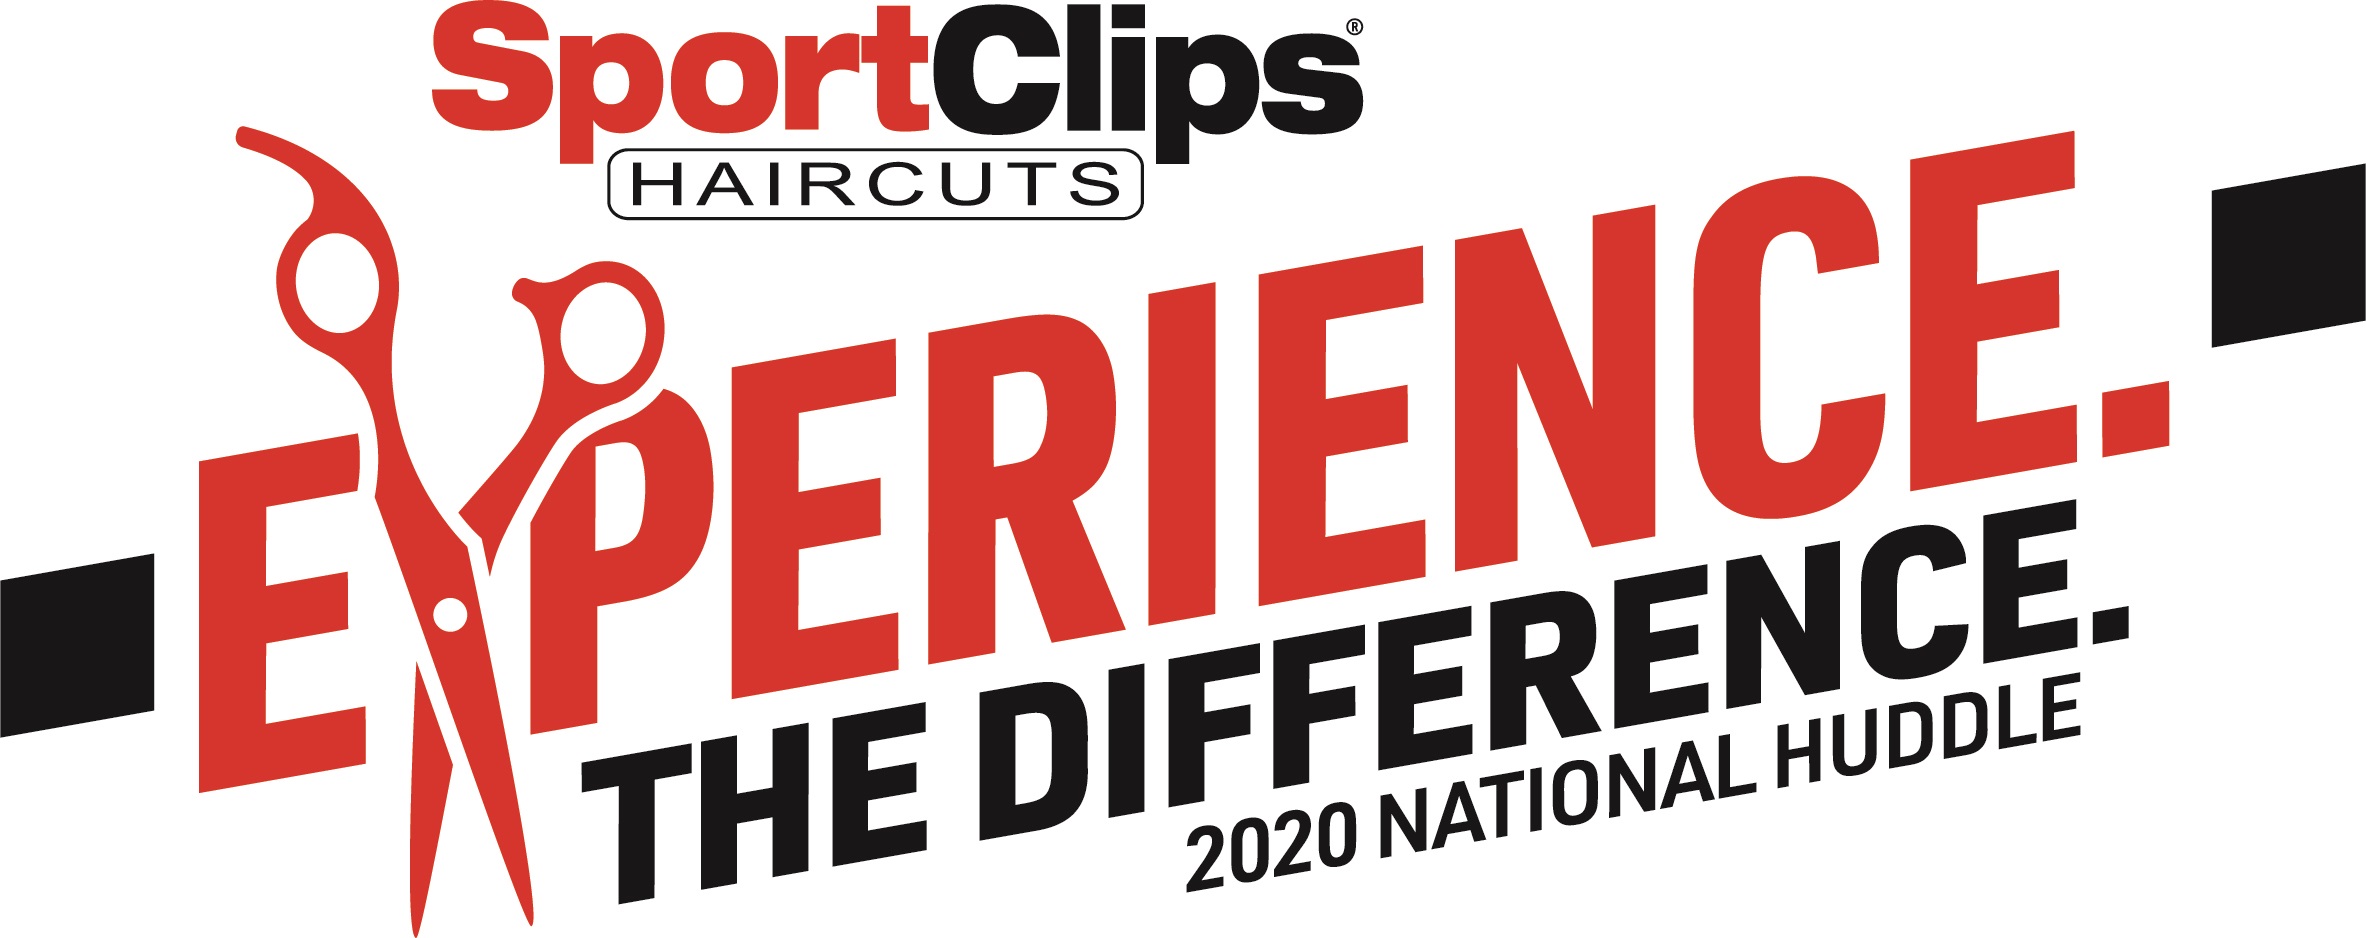 Sport Clips Experience The Difference National Huddle Logo